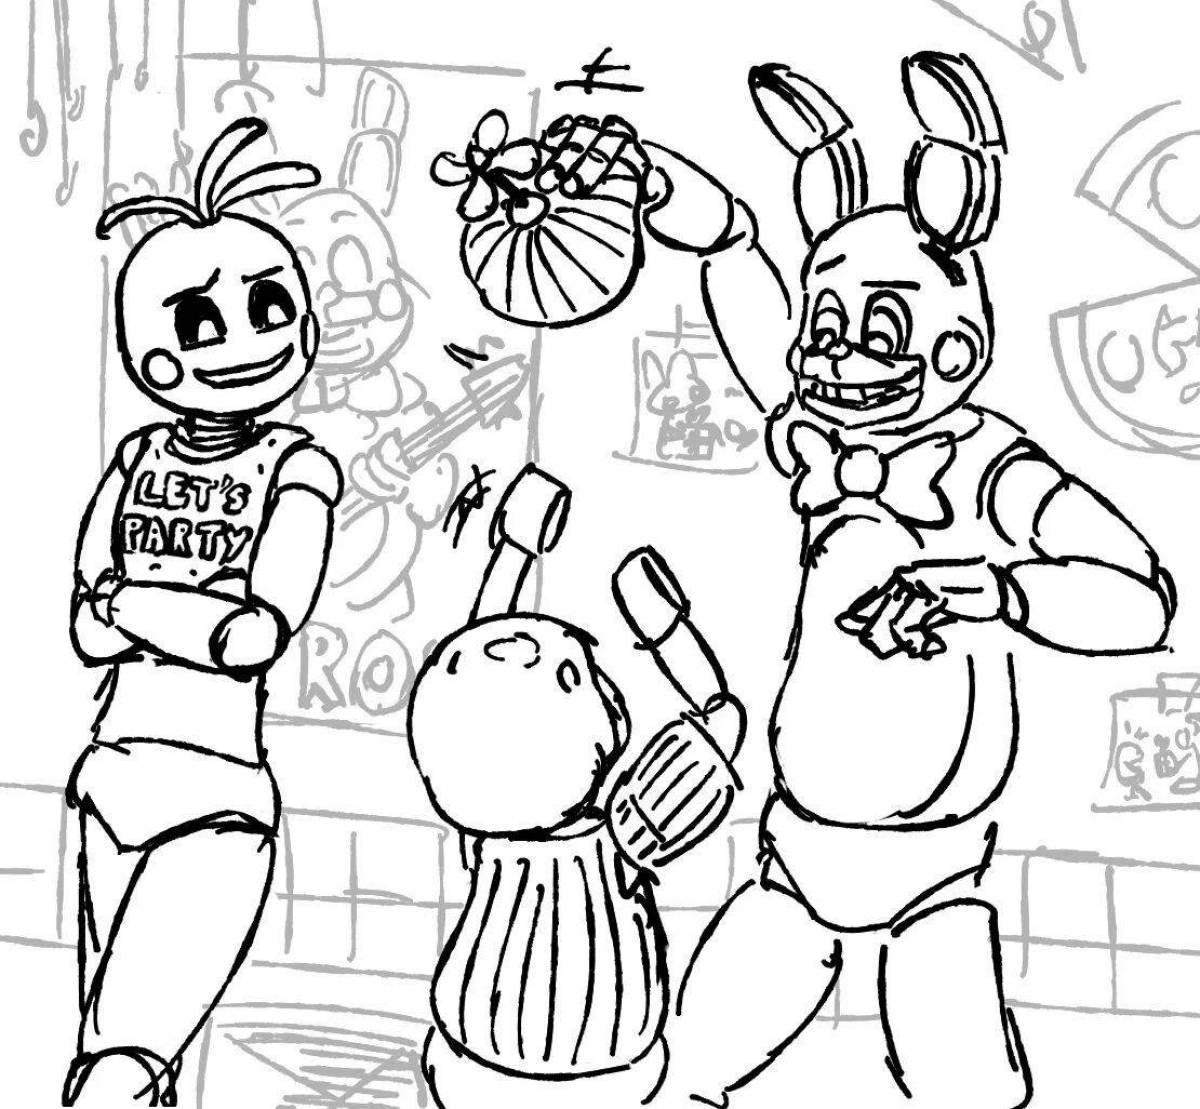 That fnaf chick live coloring page